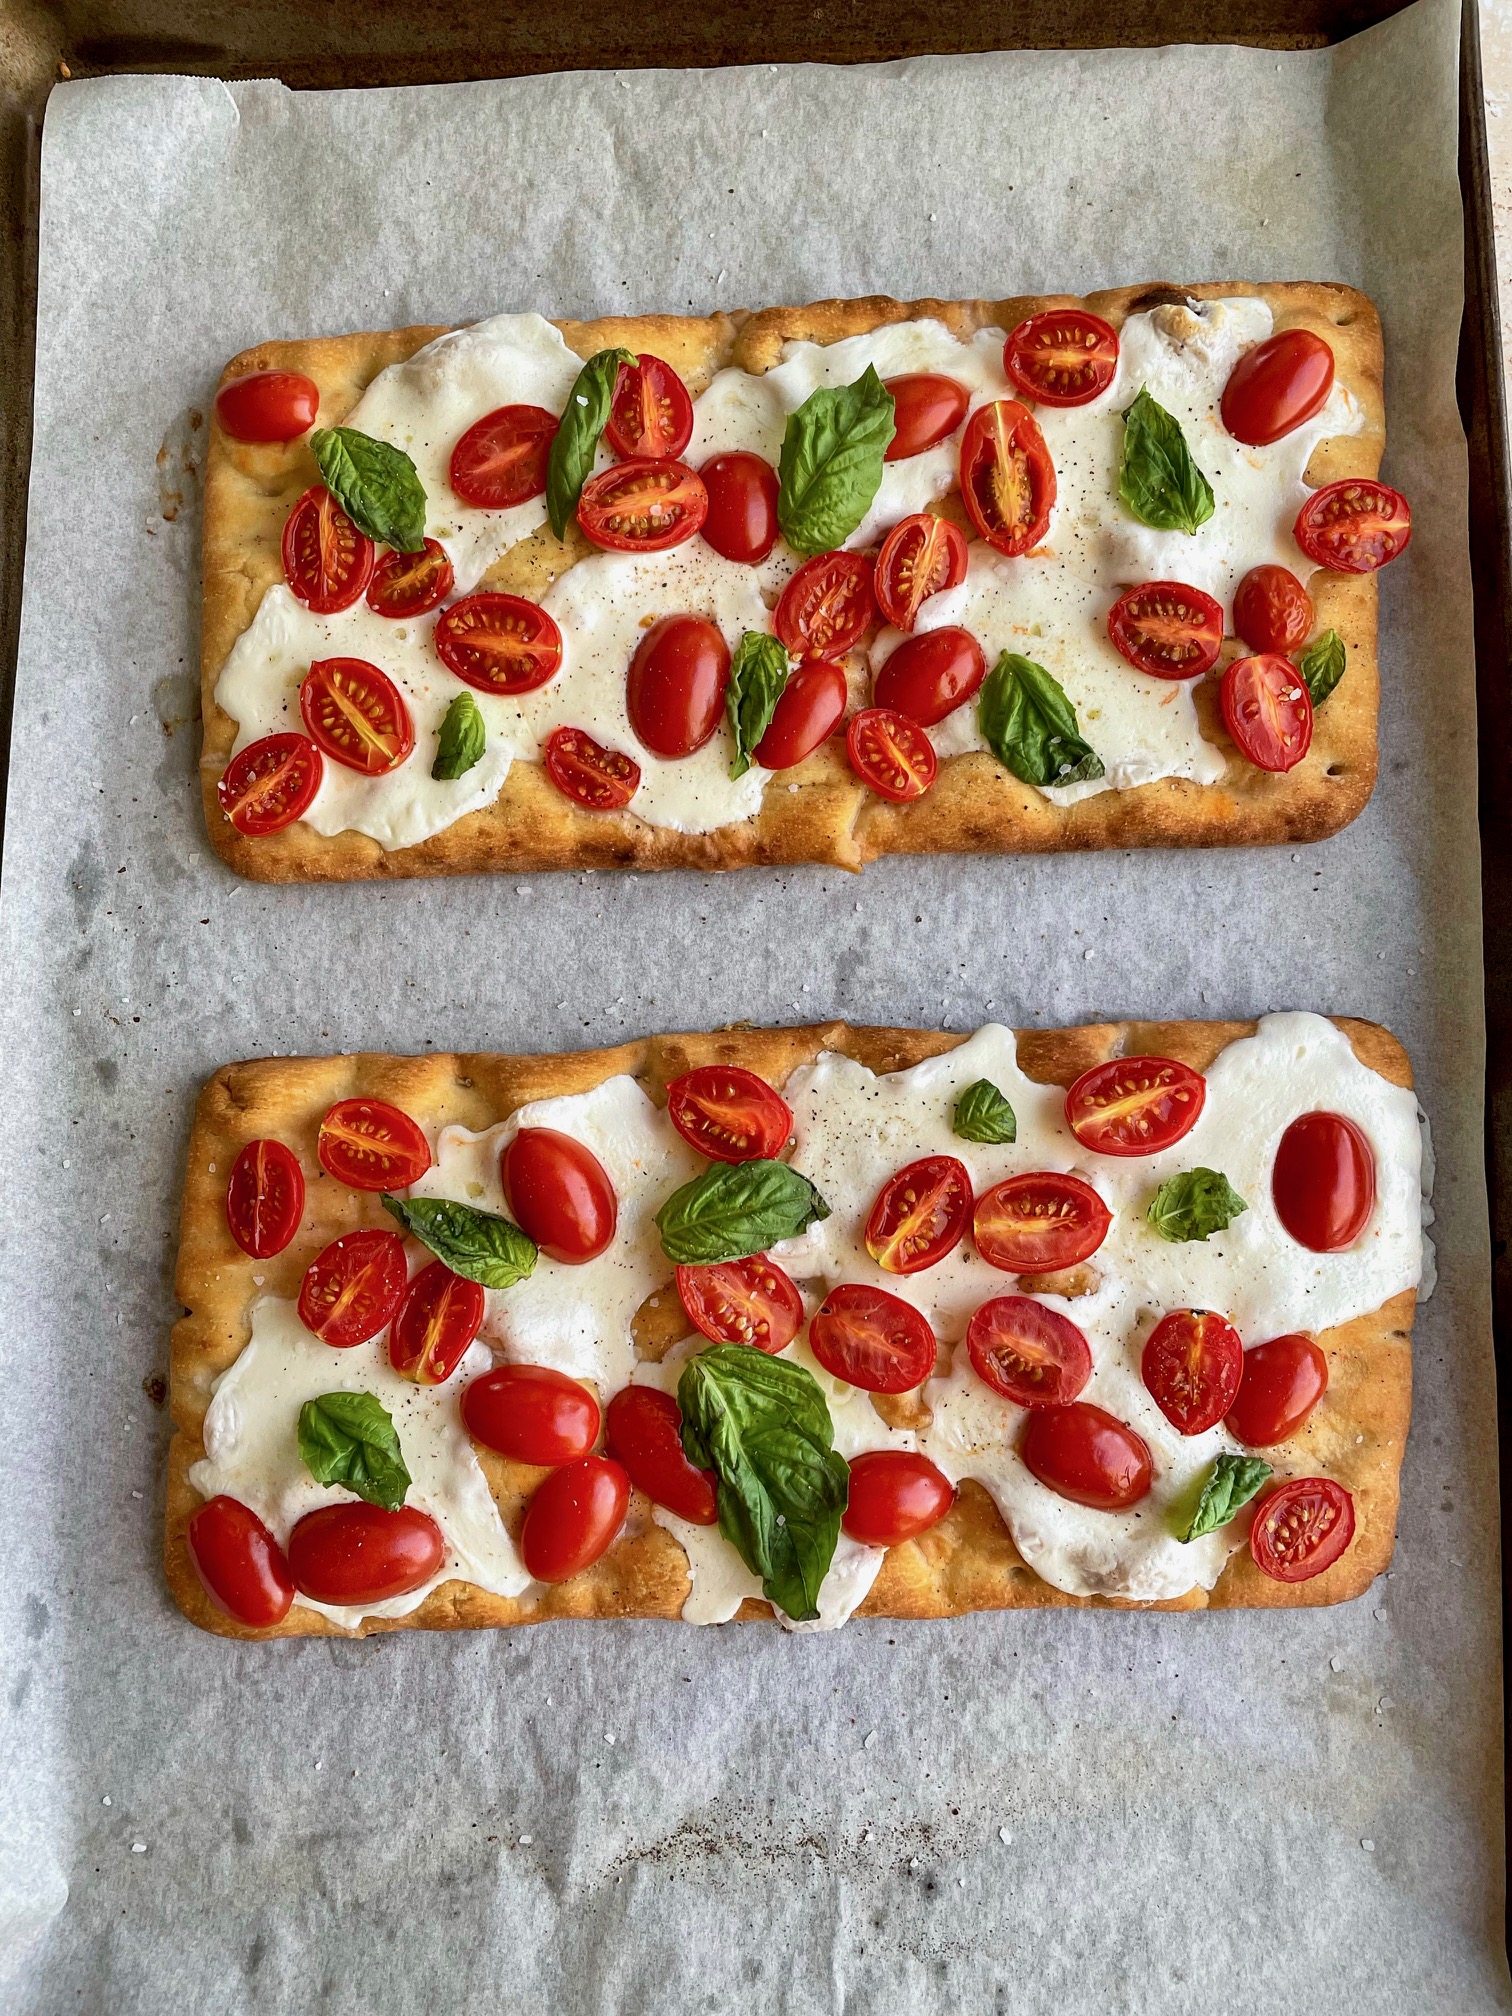 Caprese flatbreads finished baking with basil added before cutting into pieces and adding balsamic glaze.